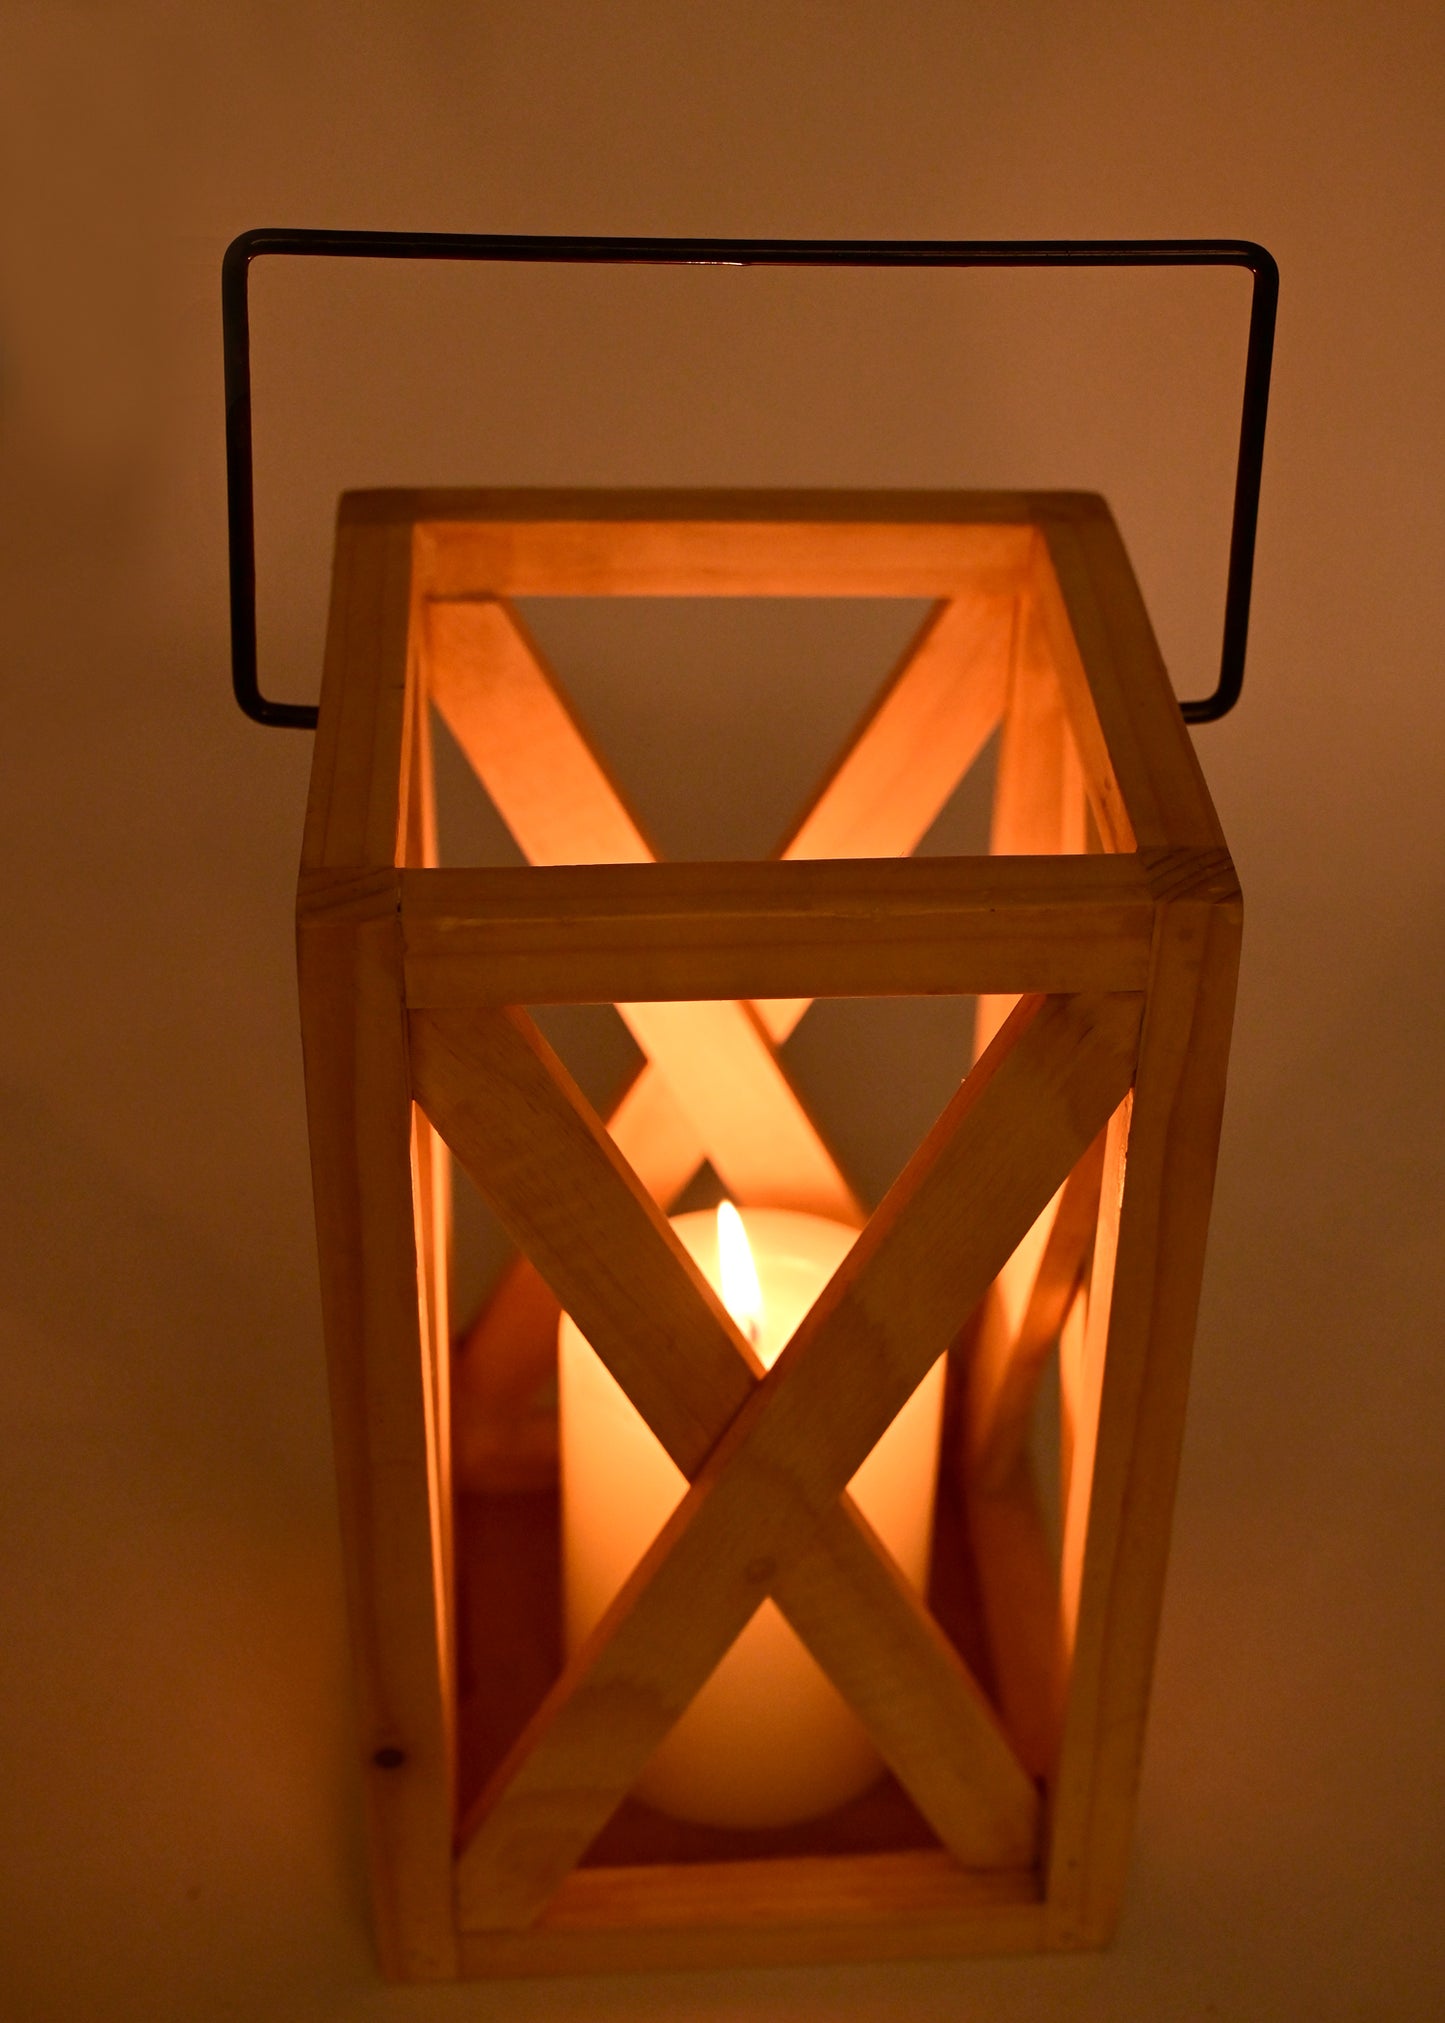 The Weaver's Nest  Wooden Hanging Lantern with Glass Jar Candle for Home Decoration, Festival Decor